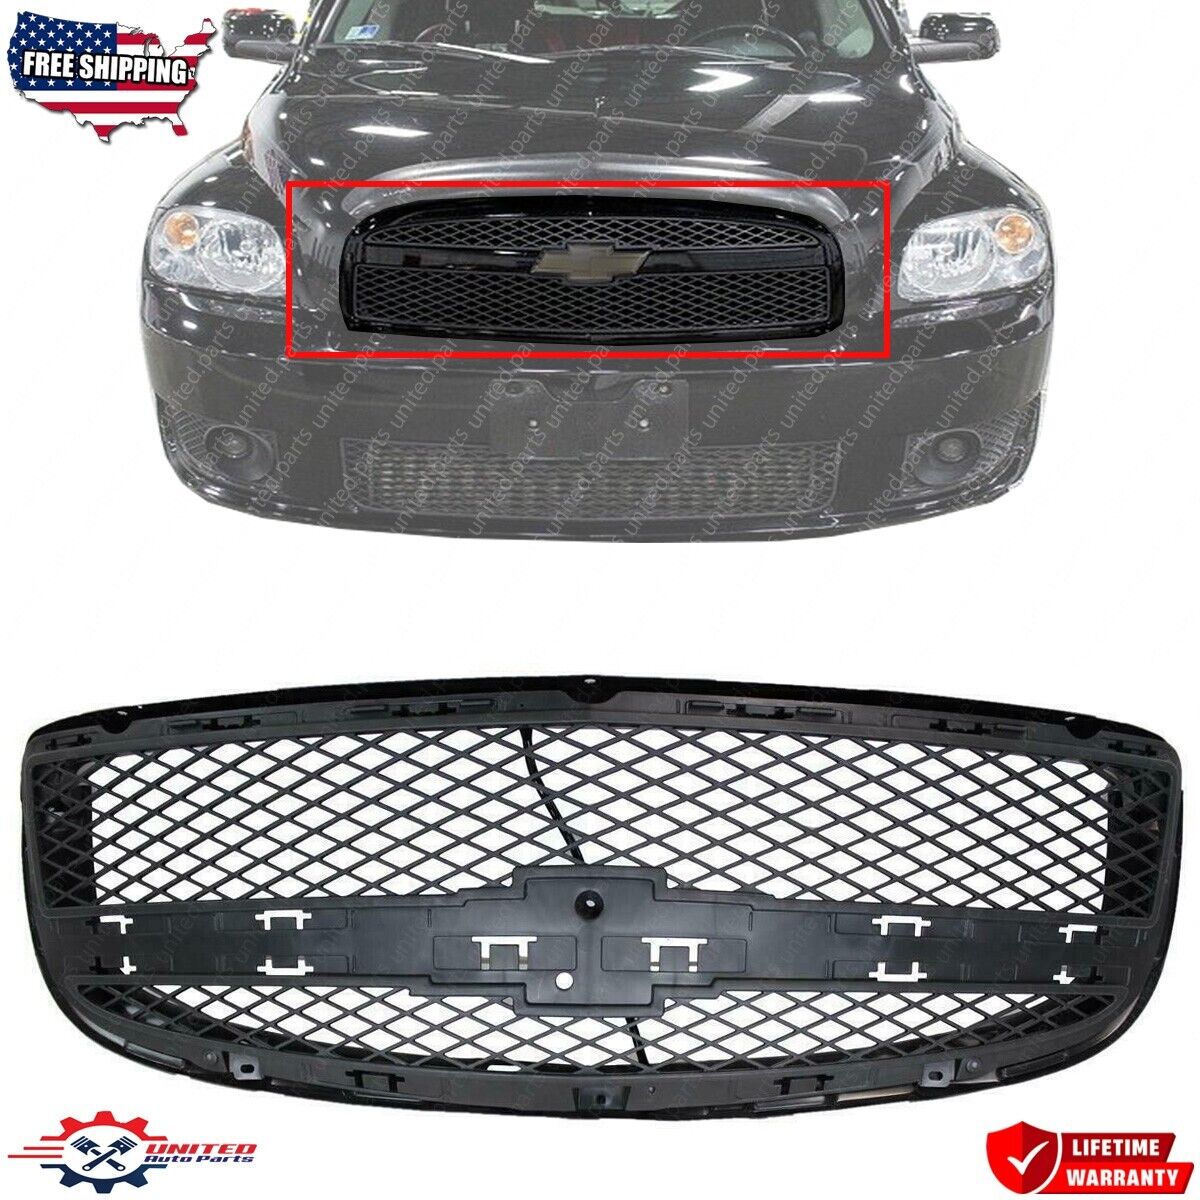 New Front Grill Grille Assembly Full Black For 2008 2009 2010 Chevrolet HHR